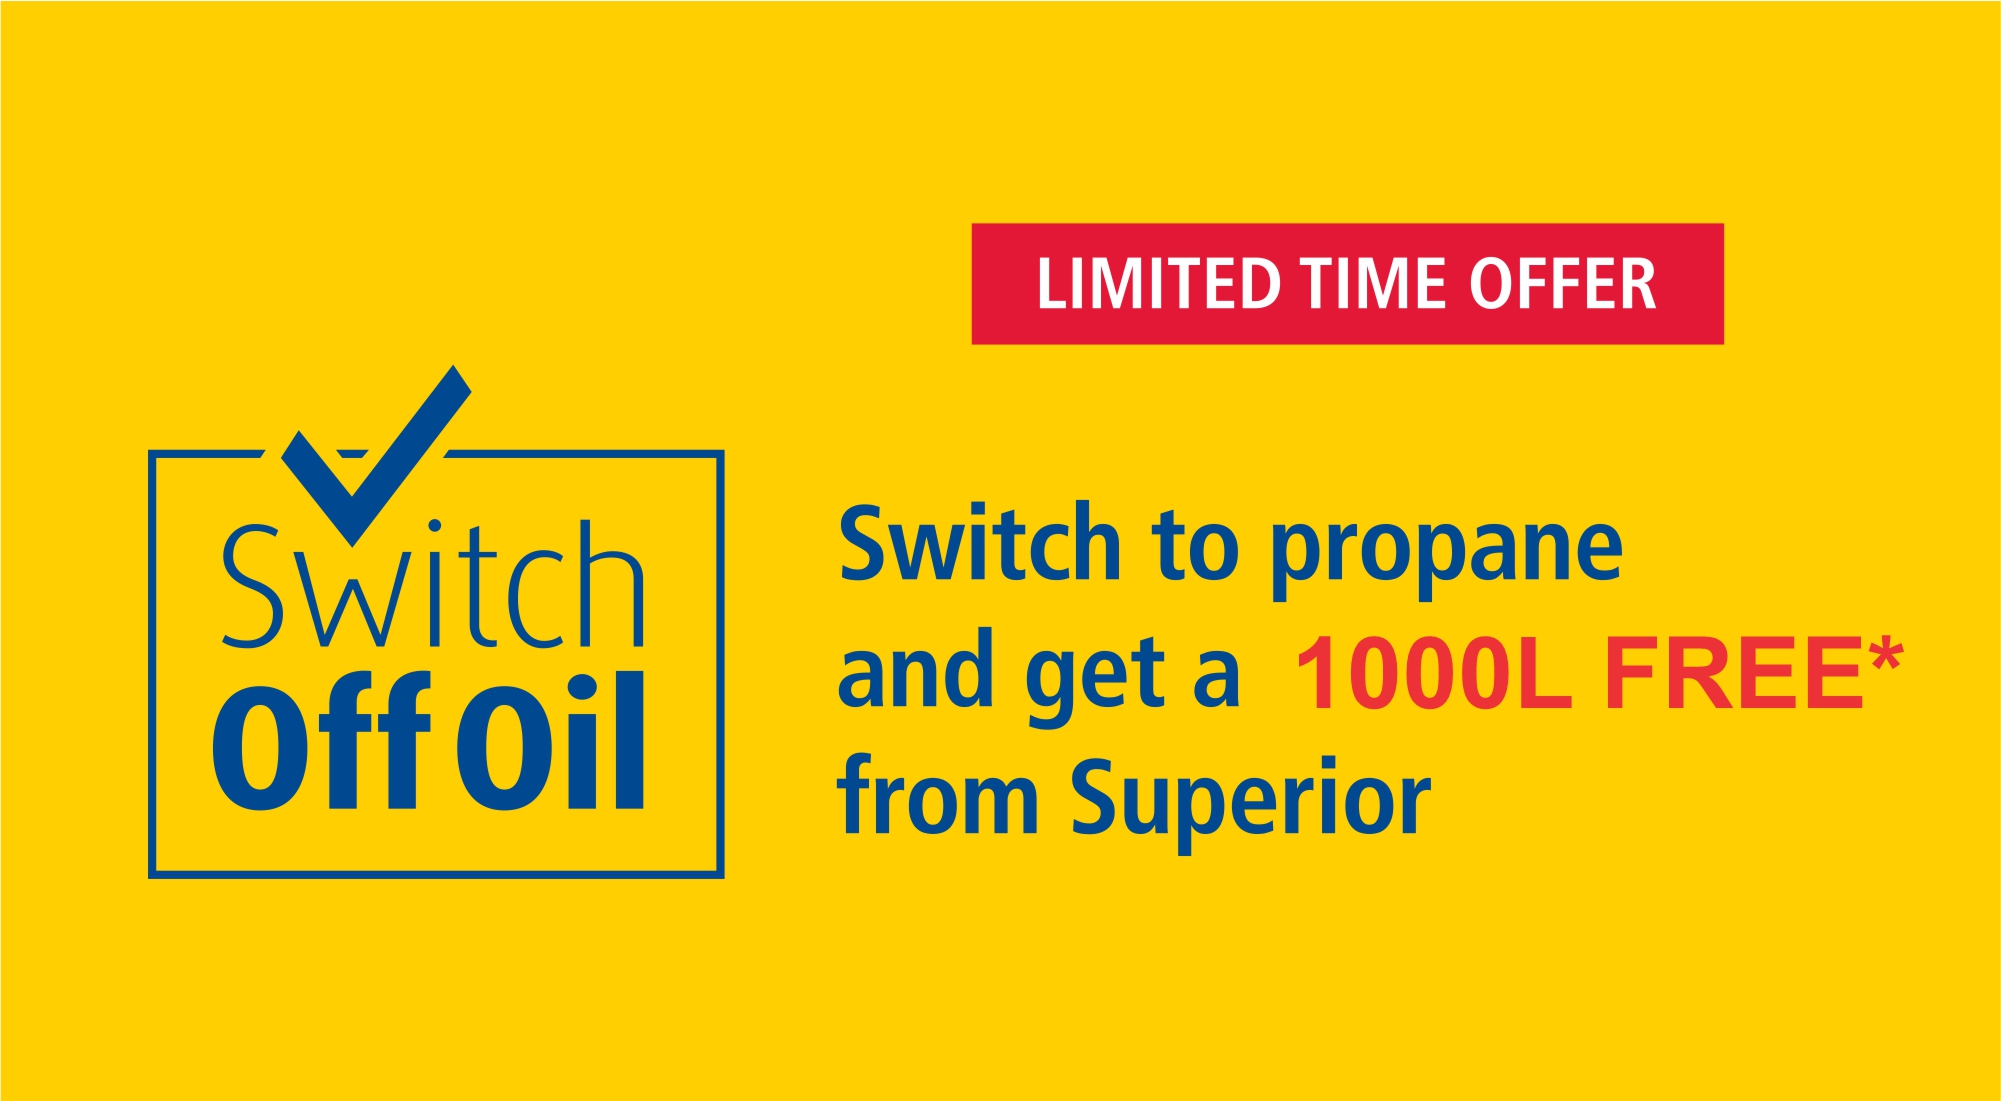 SWITCH OFF OIL - Superior Propane Arctica Heating and Cooling